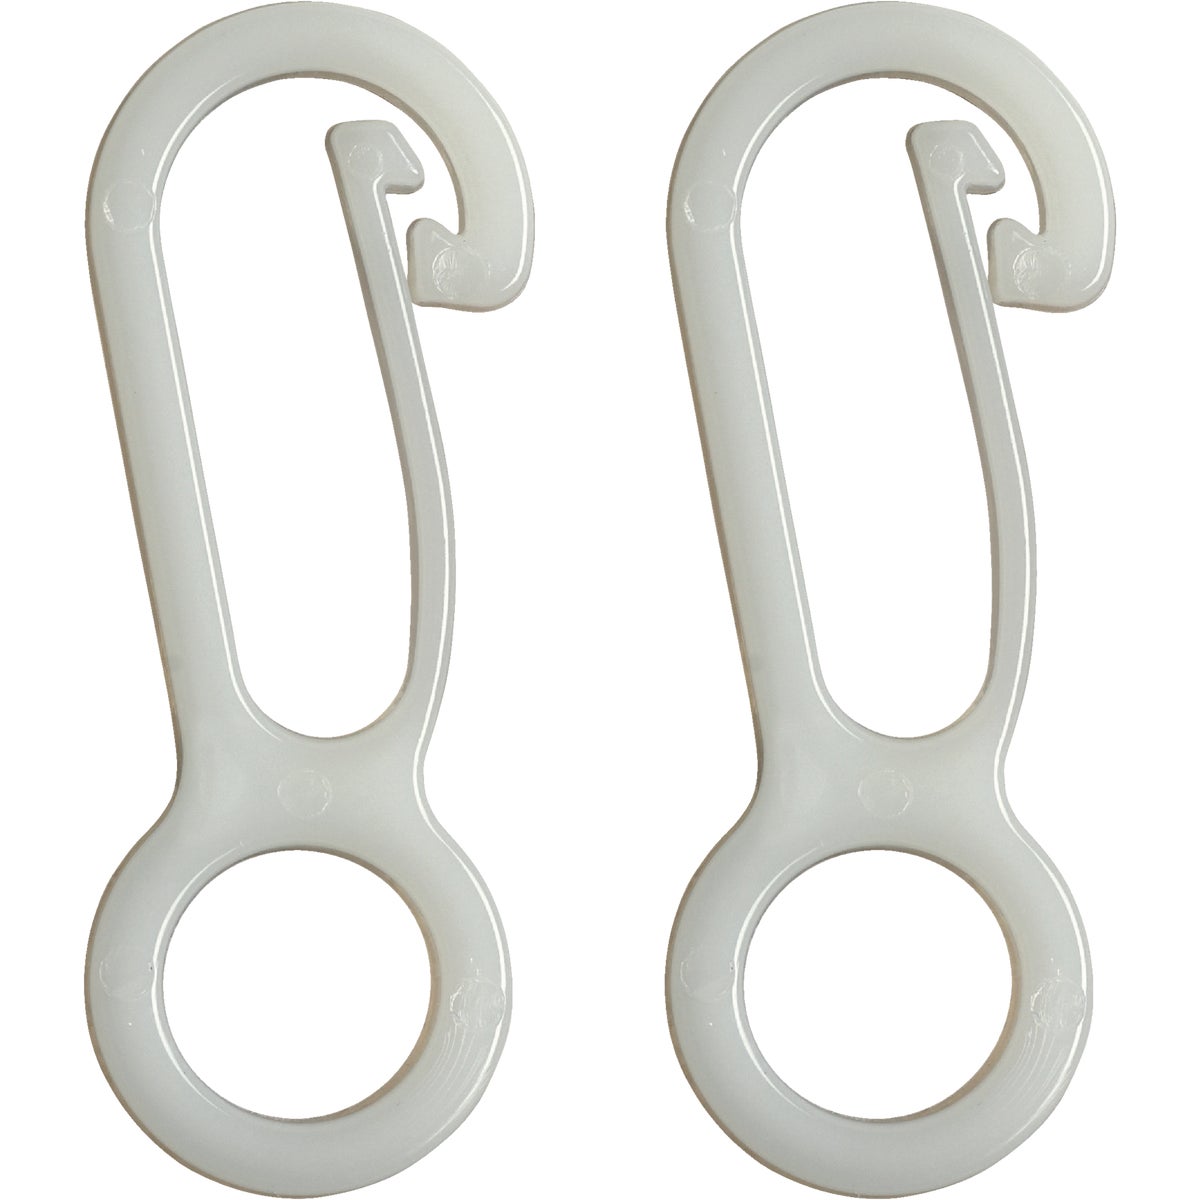 Item 828157, Valley Forges nylon flag clips are the perfect clip for any clipping needs 